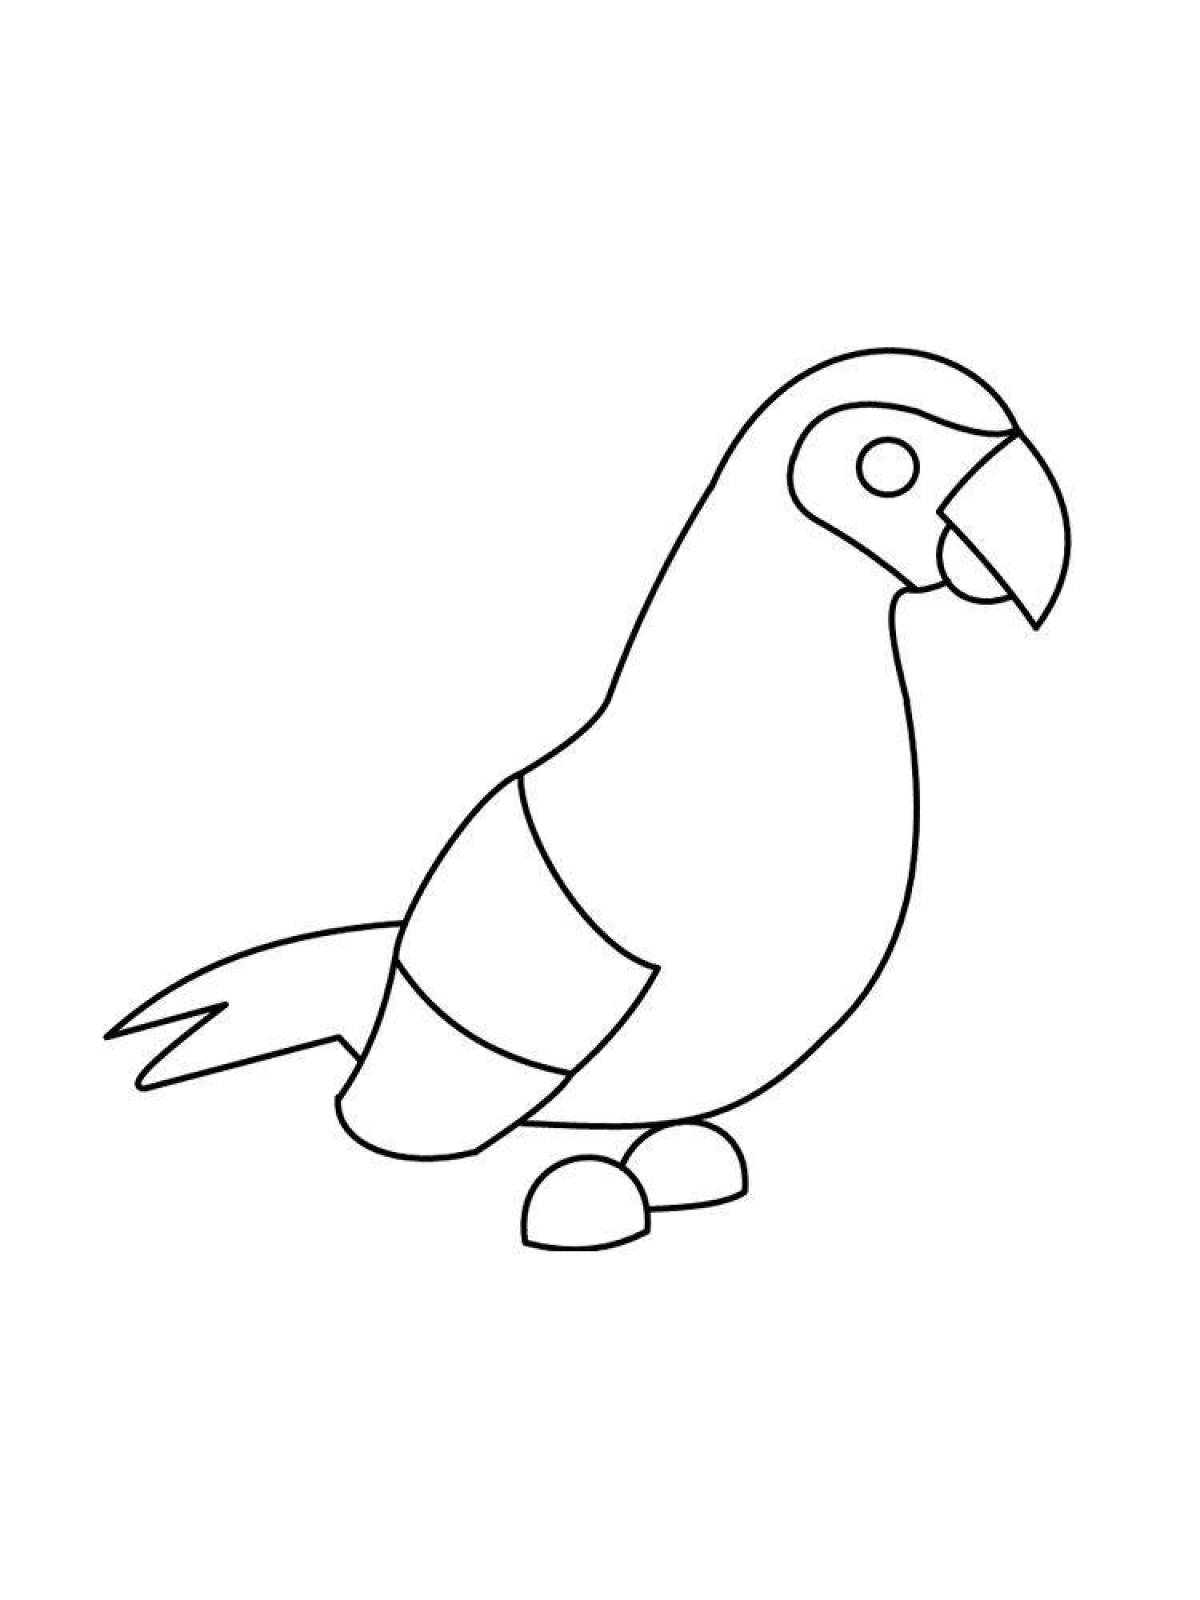 Adorable Adopt Me Coloring Page